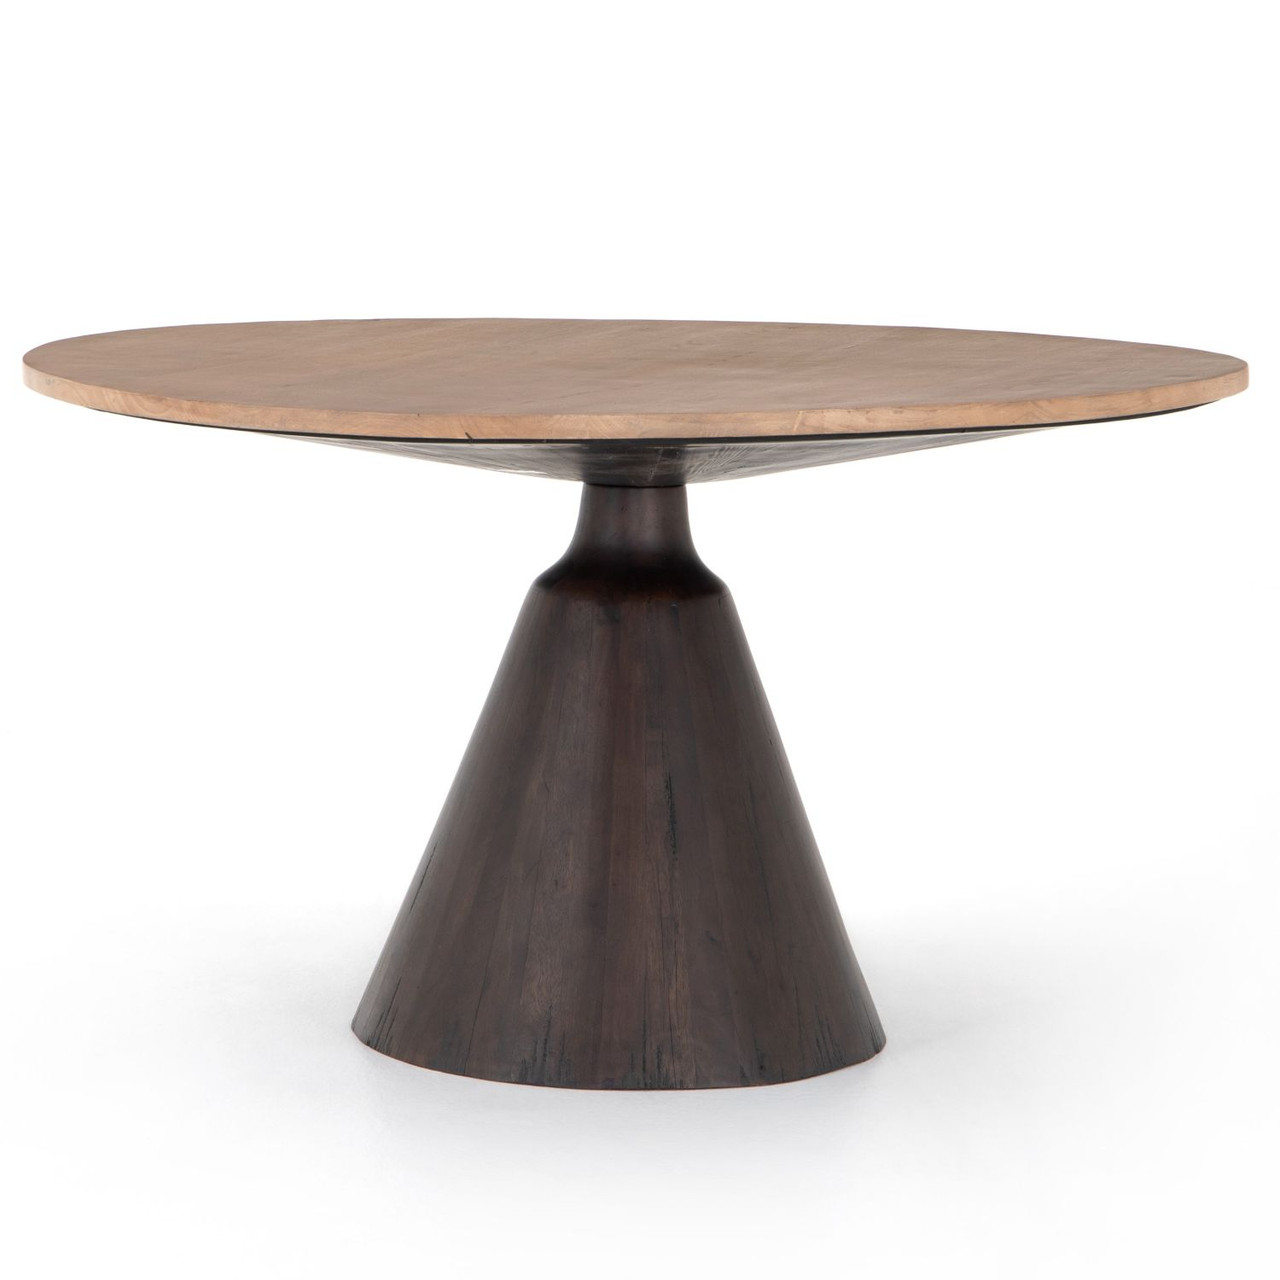 Bronx Light Brushed Parawood Round Pedestal Dining Table 54 Zin Home